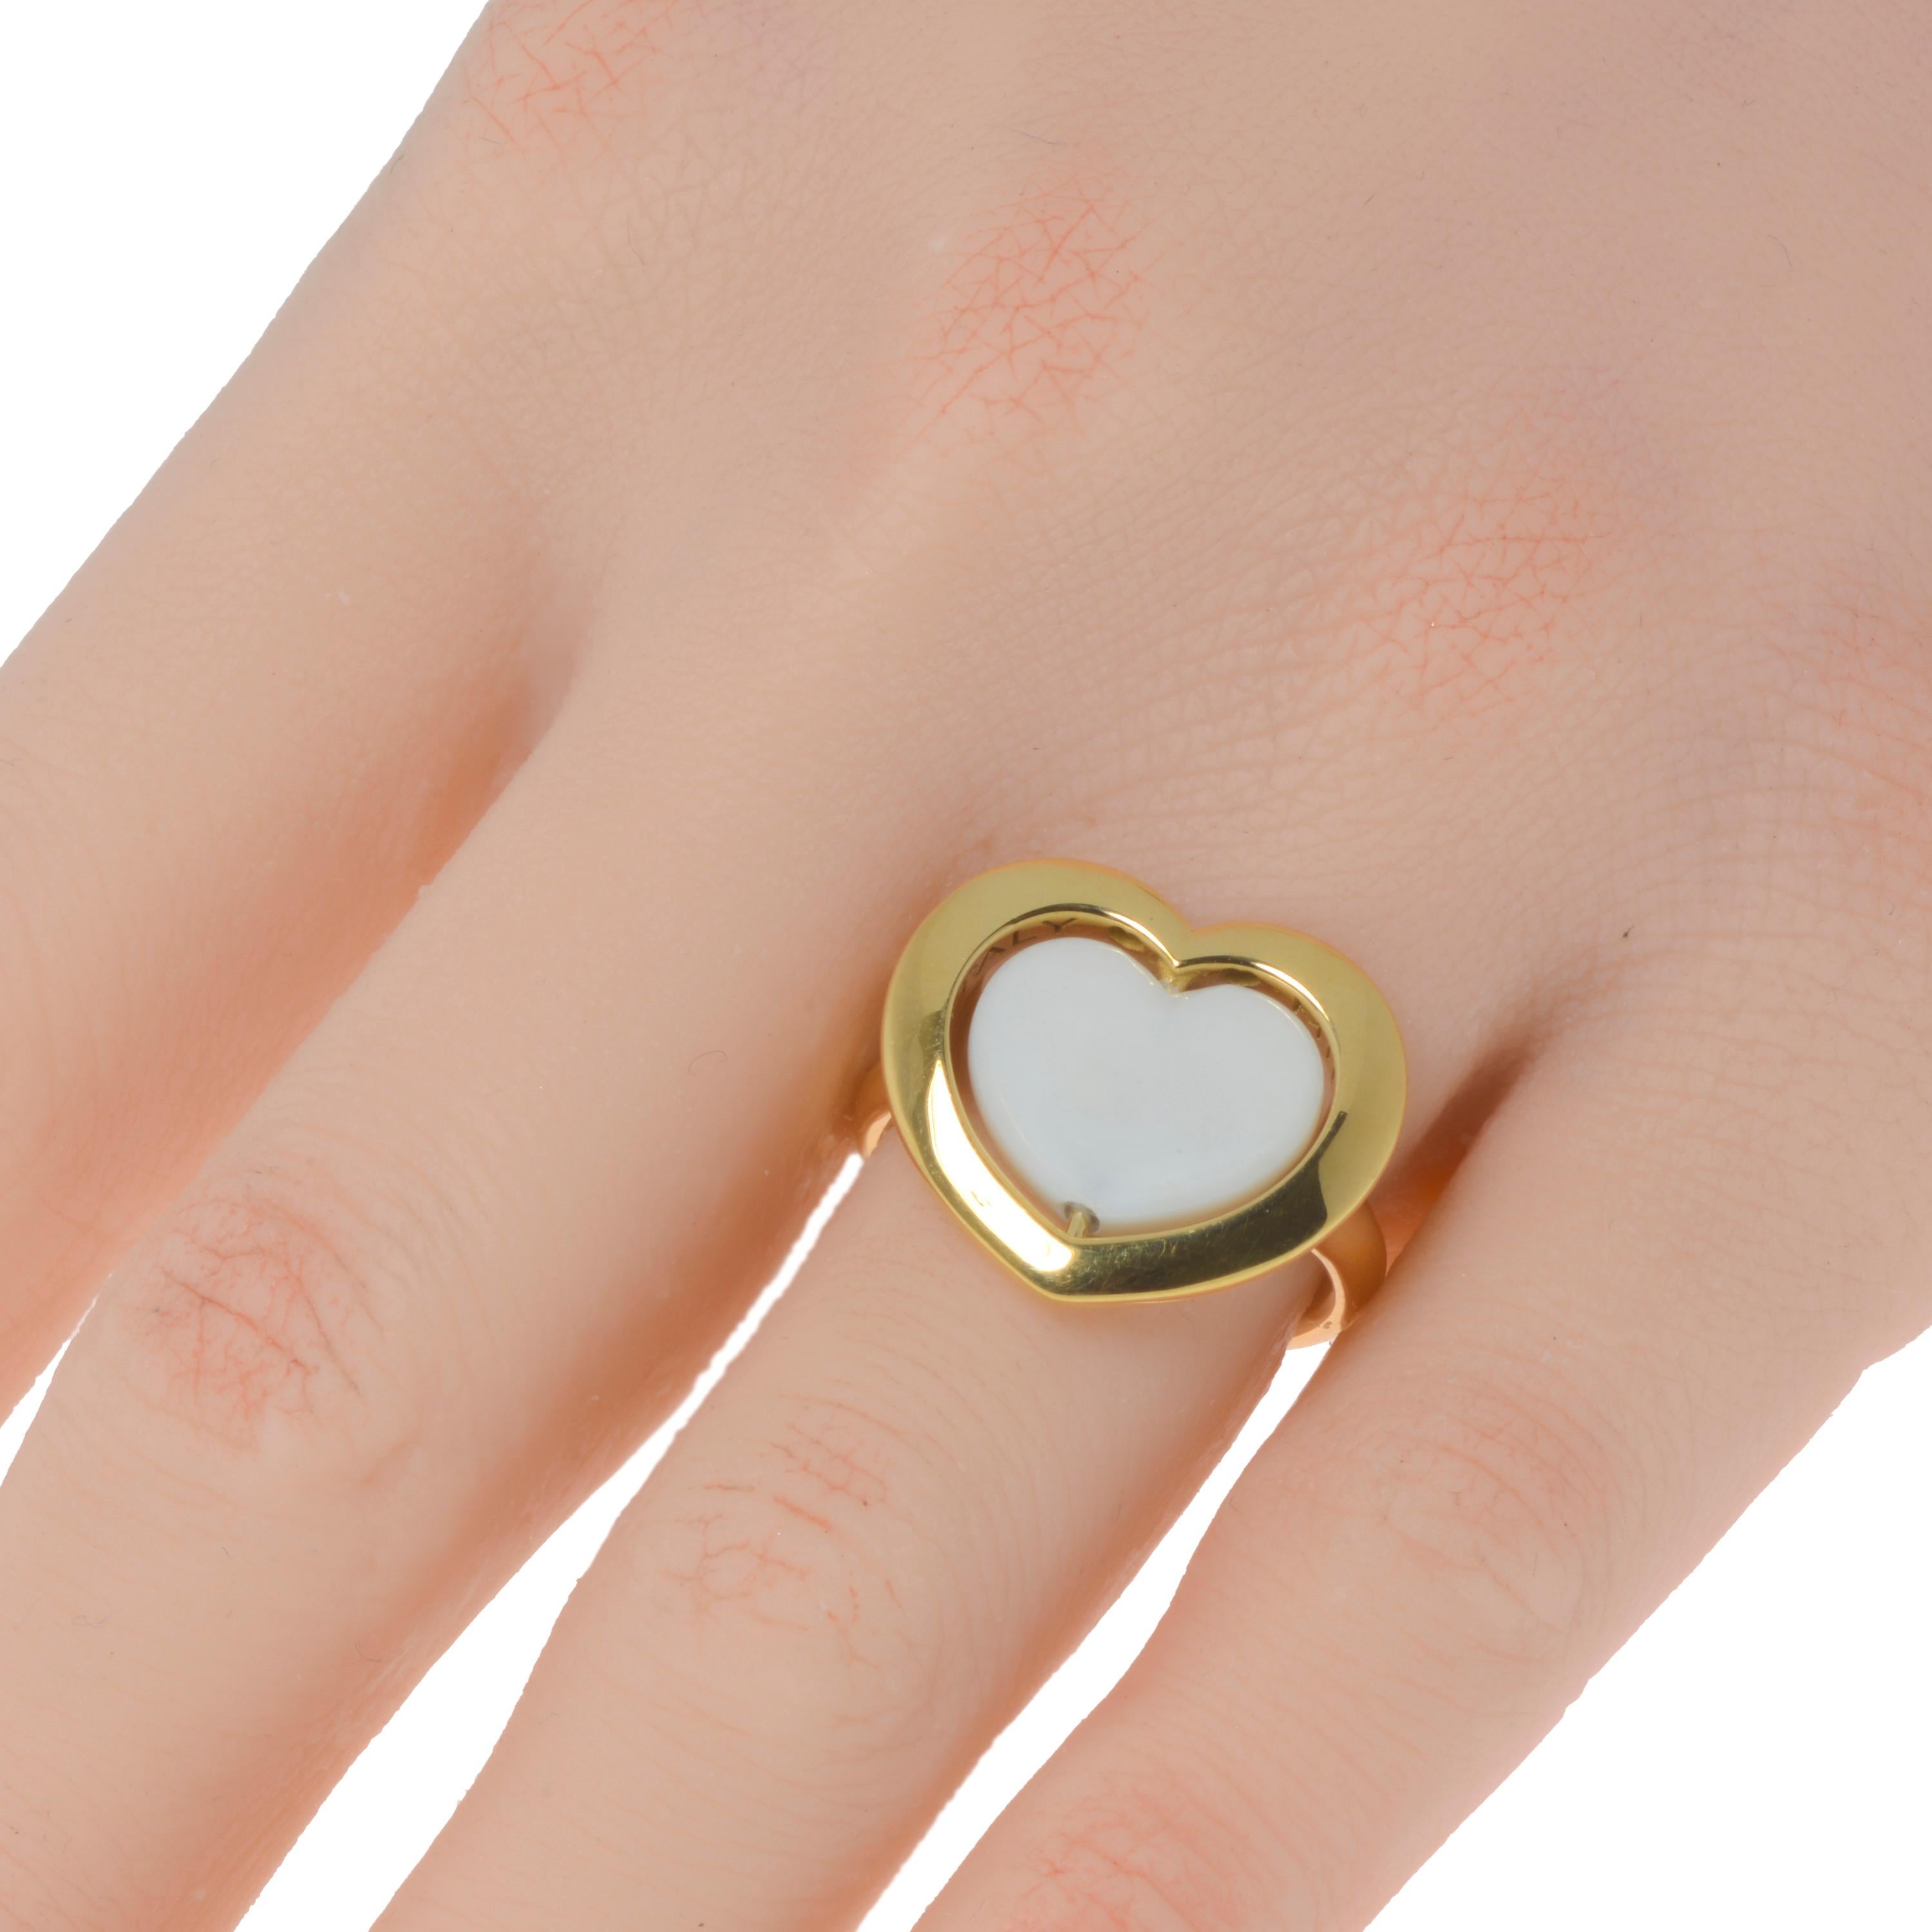 Mimi Milano 18K yellow gold cocktail ring features a convex white quartzite heart which can be rotated to reveal a yellow gold side that matches a shiny 18K yellow gold frame and band. The ring size is 6.75. The decoration size is 3/4